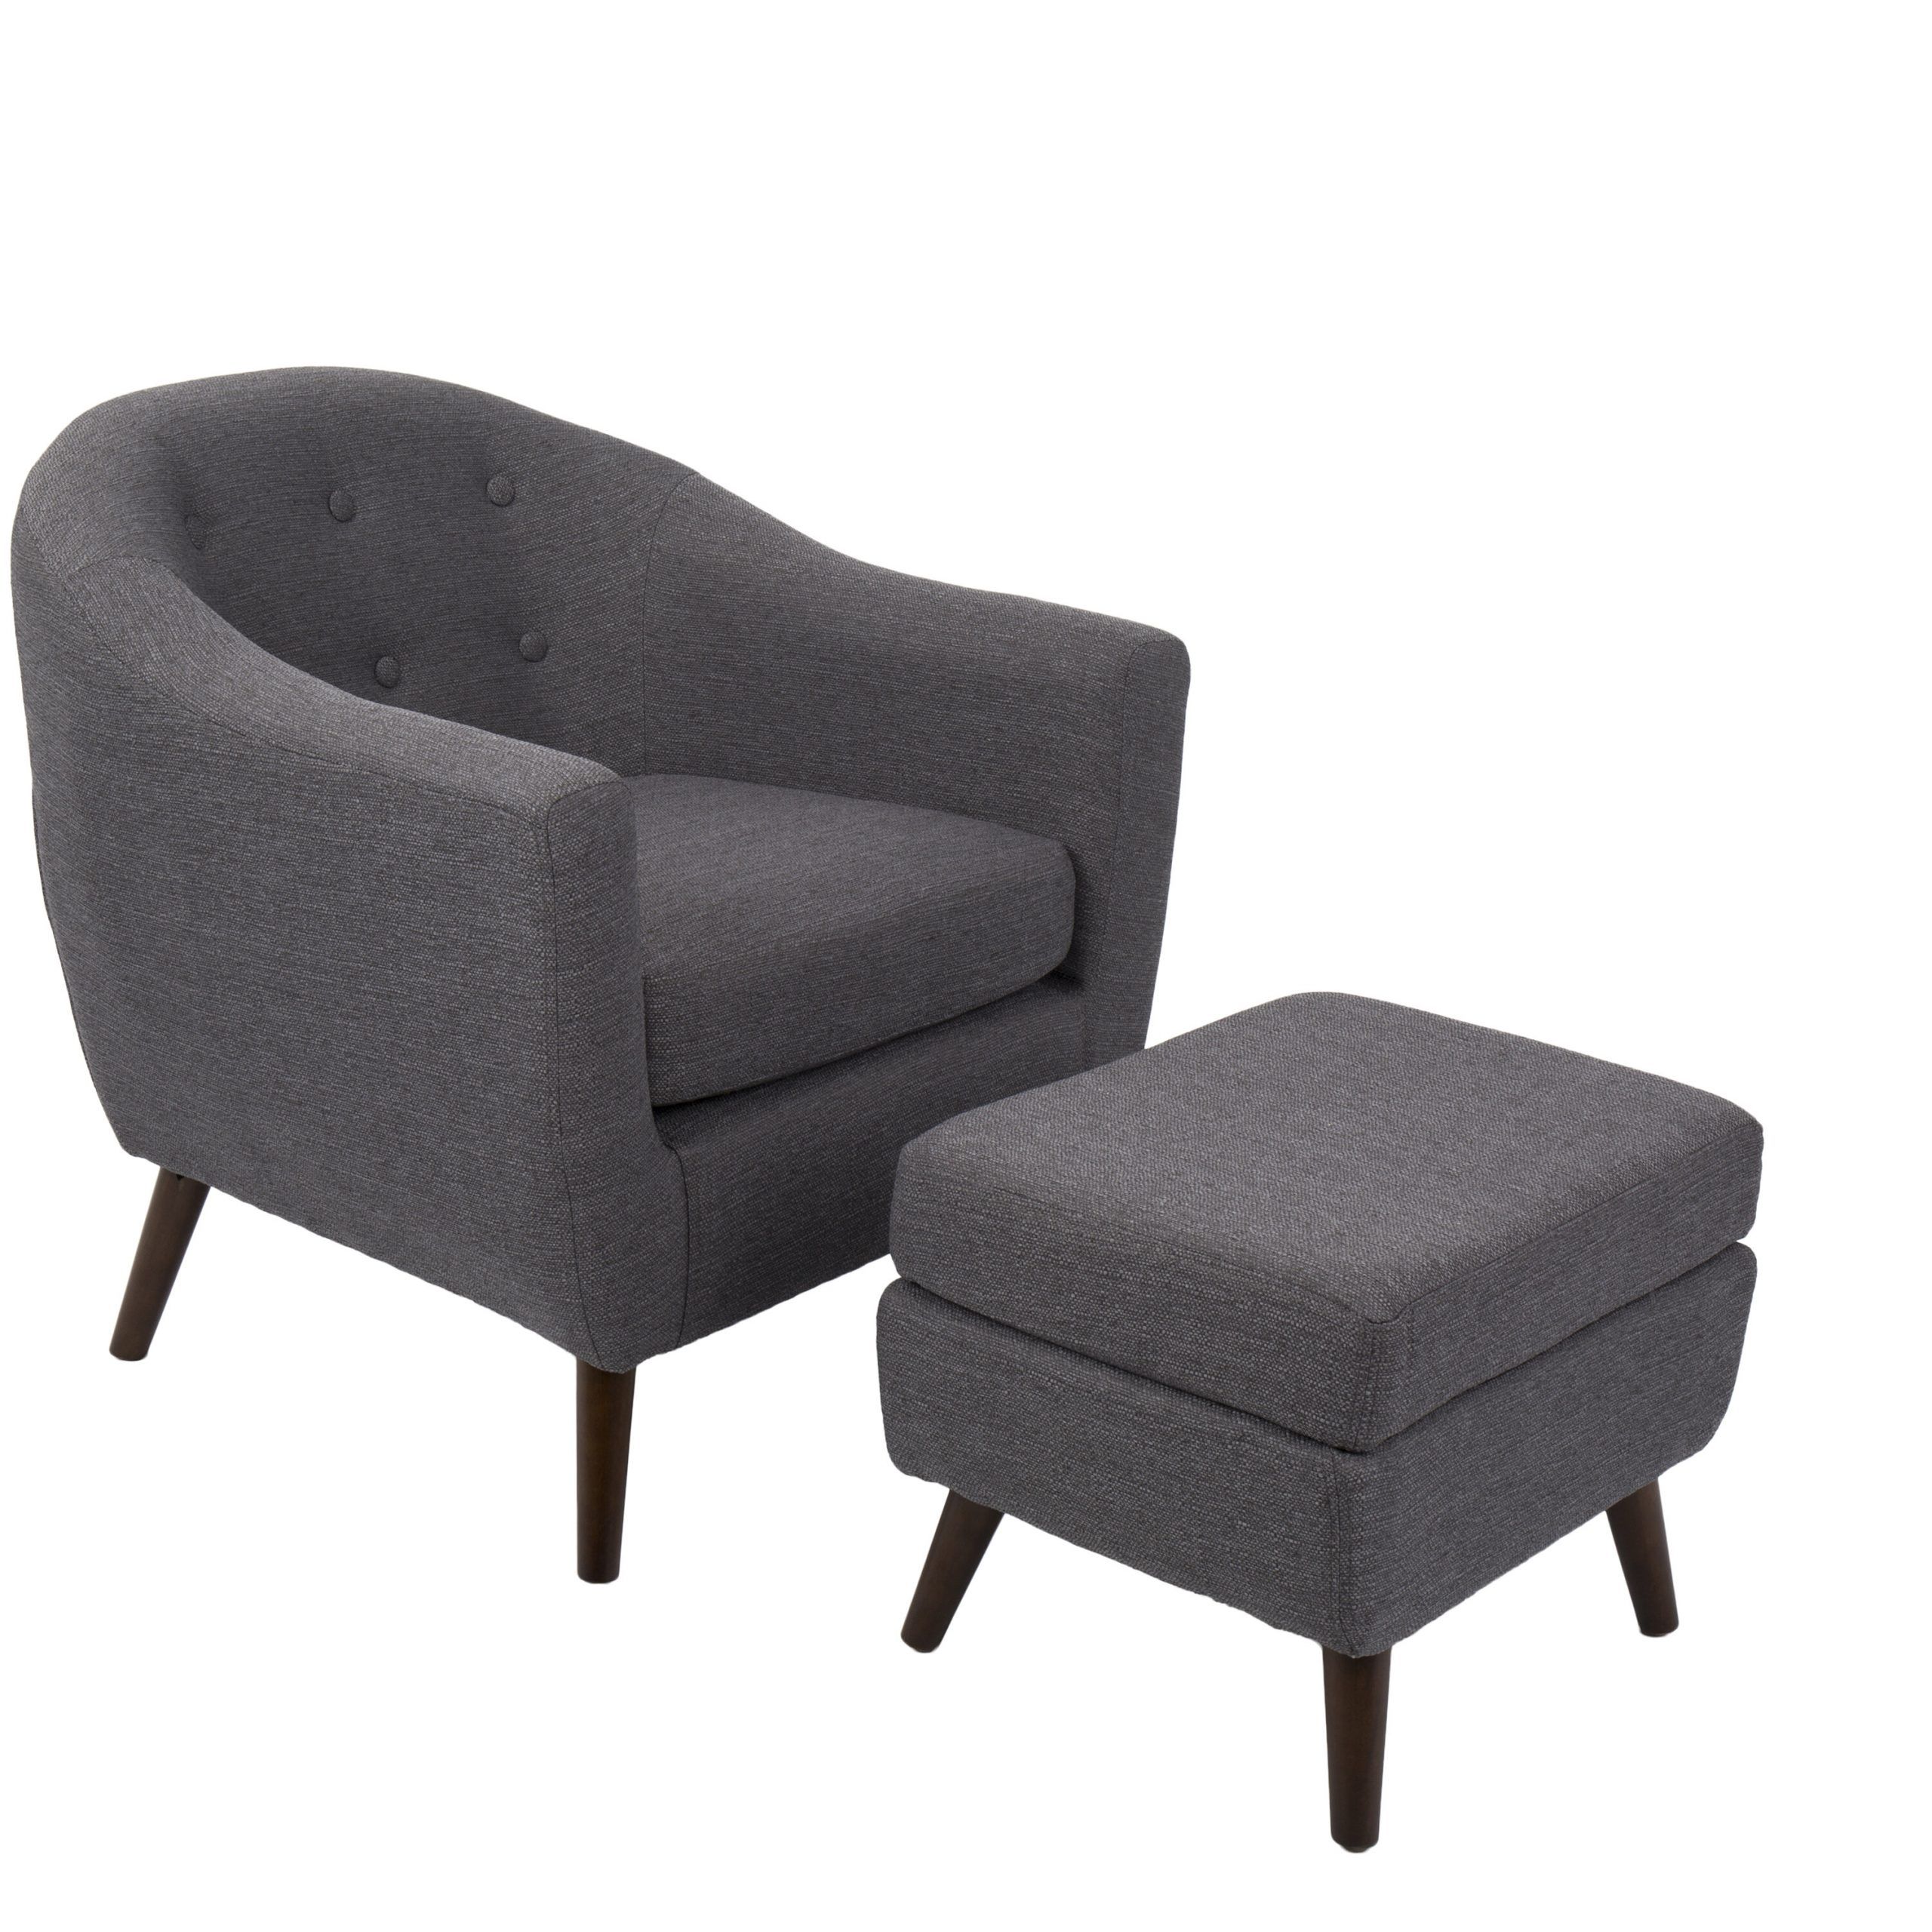 Dario 22" W Polyester Slipper Chair And Ottoman Regarding Alexander Cotton Blend Armchairs And Ottoman (View 9 of 15)